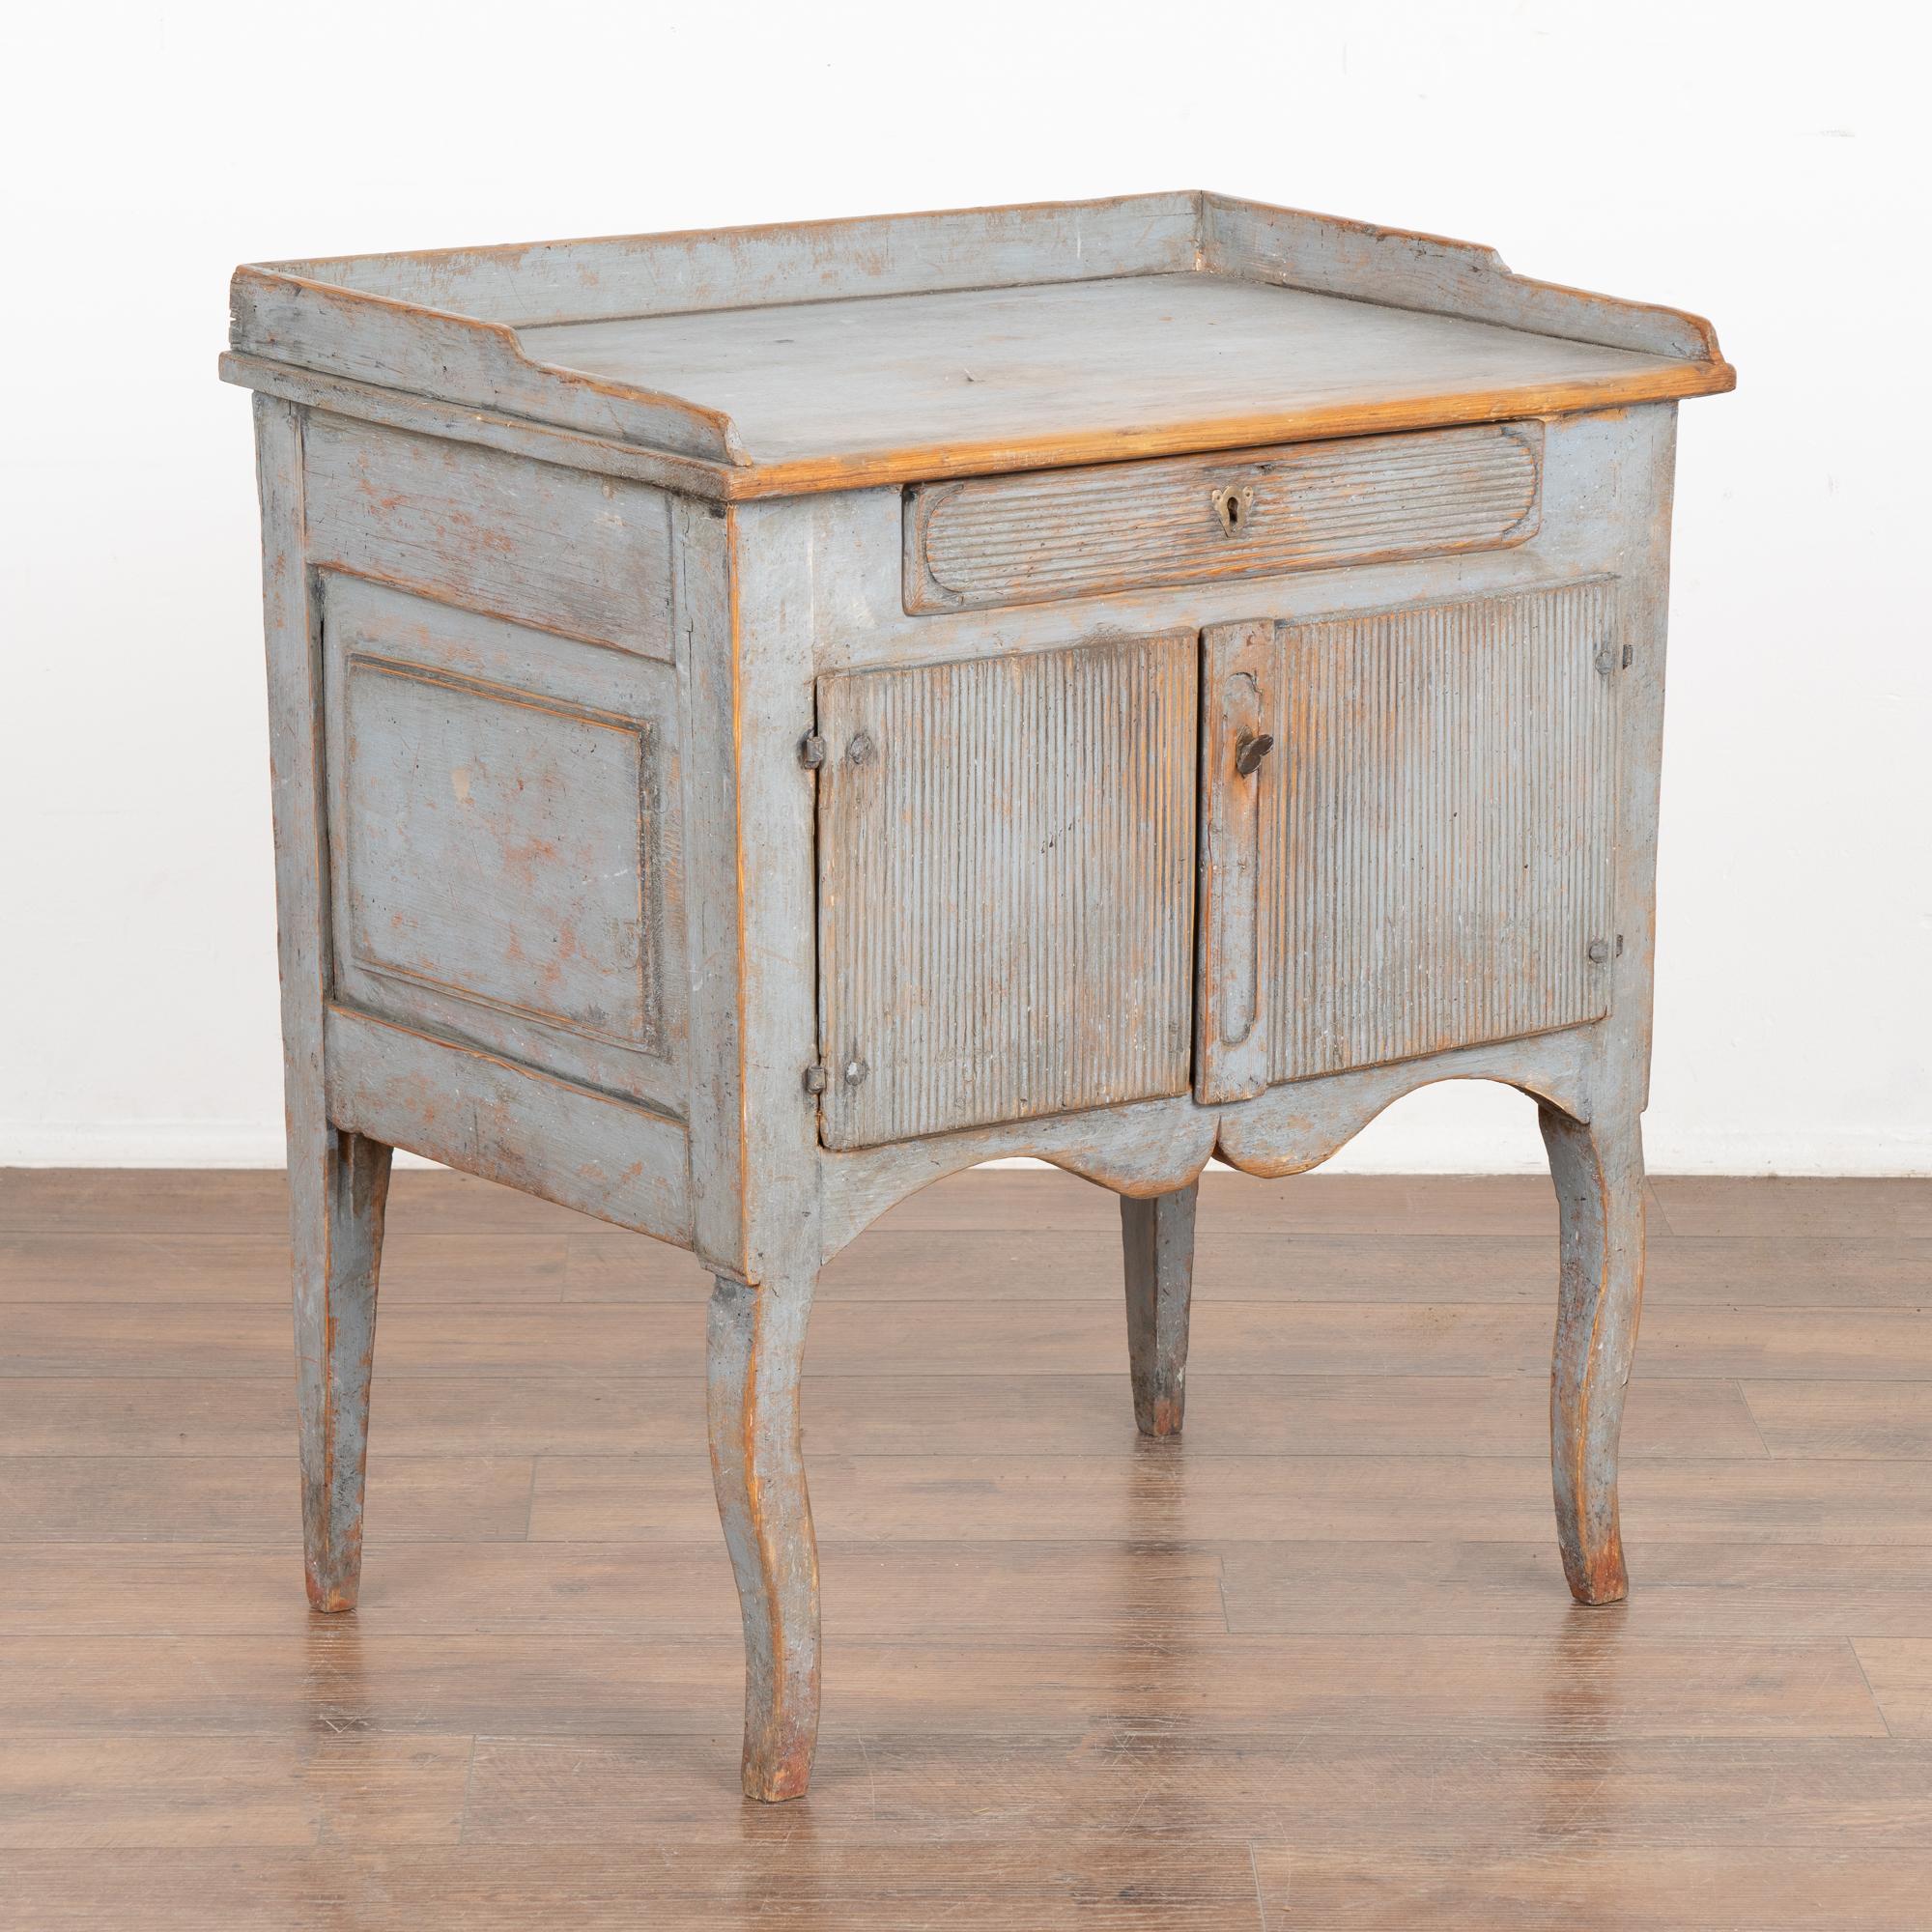 Small Swedish country cabinet standing on tapered/curved legs that may serve also as a nightstand or side table. The original blue painted finish has been distressed through generations of use, adding to its authentic vintage appeal.
A single drawer